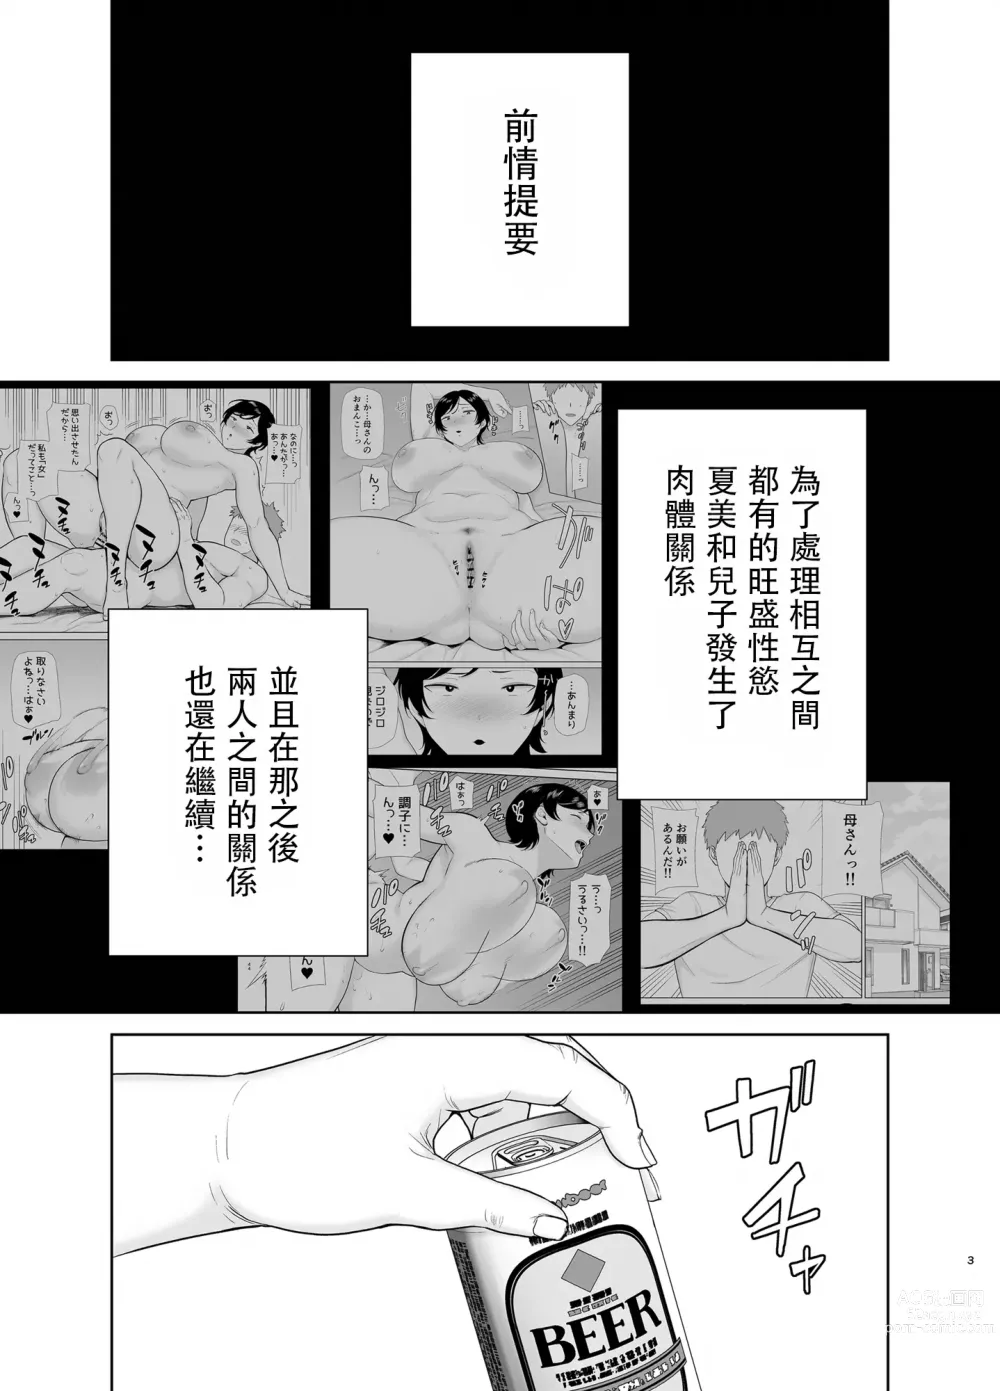 Page 2 of doujinshi 母さんだって女なんだよ！2